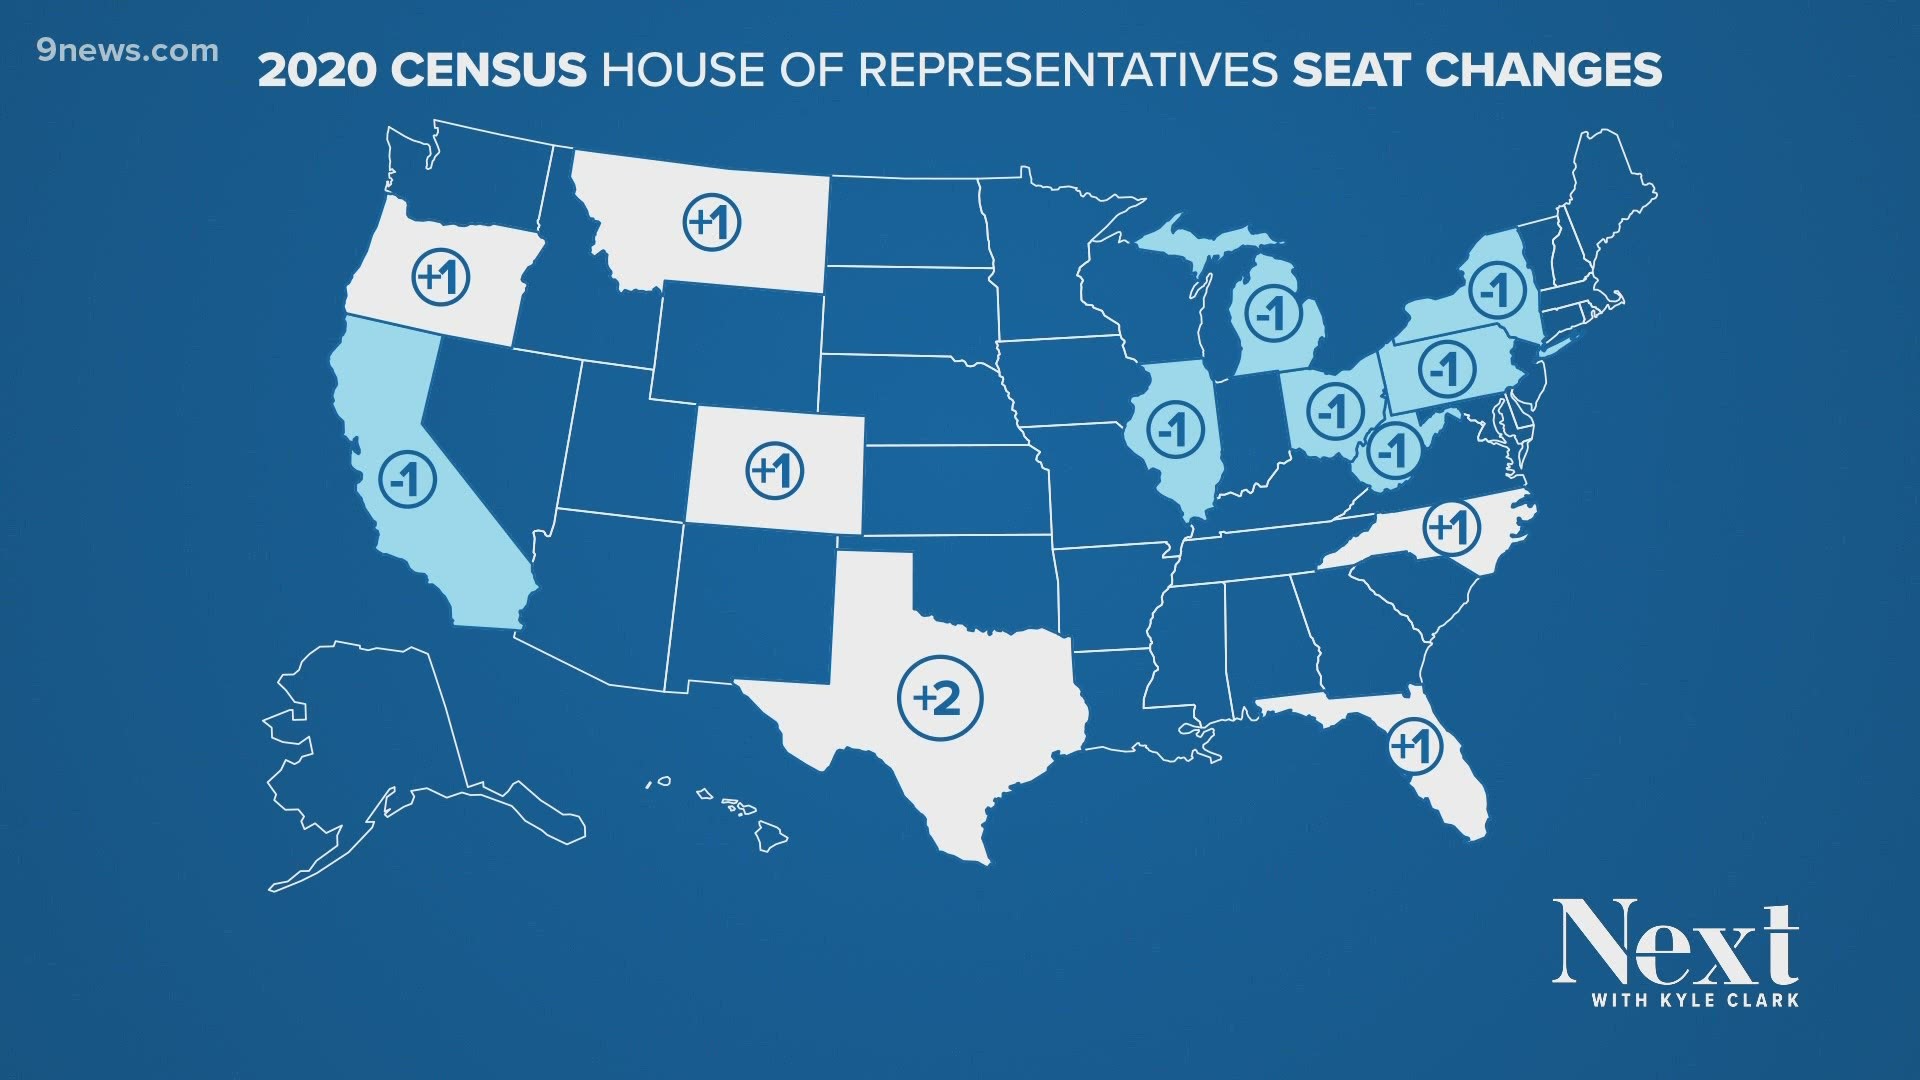 More people in Colorado means more power in Congress. U.S. Census numbers gave Colorado the eighth seat as states like New York and California lost one.